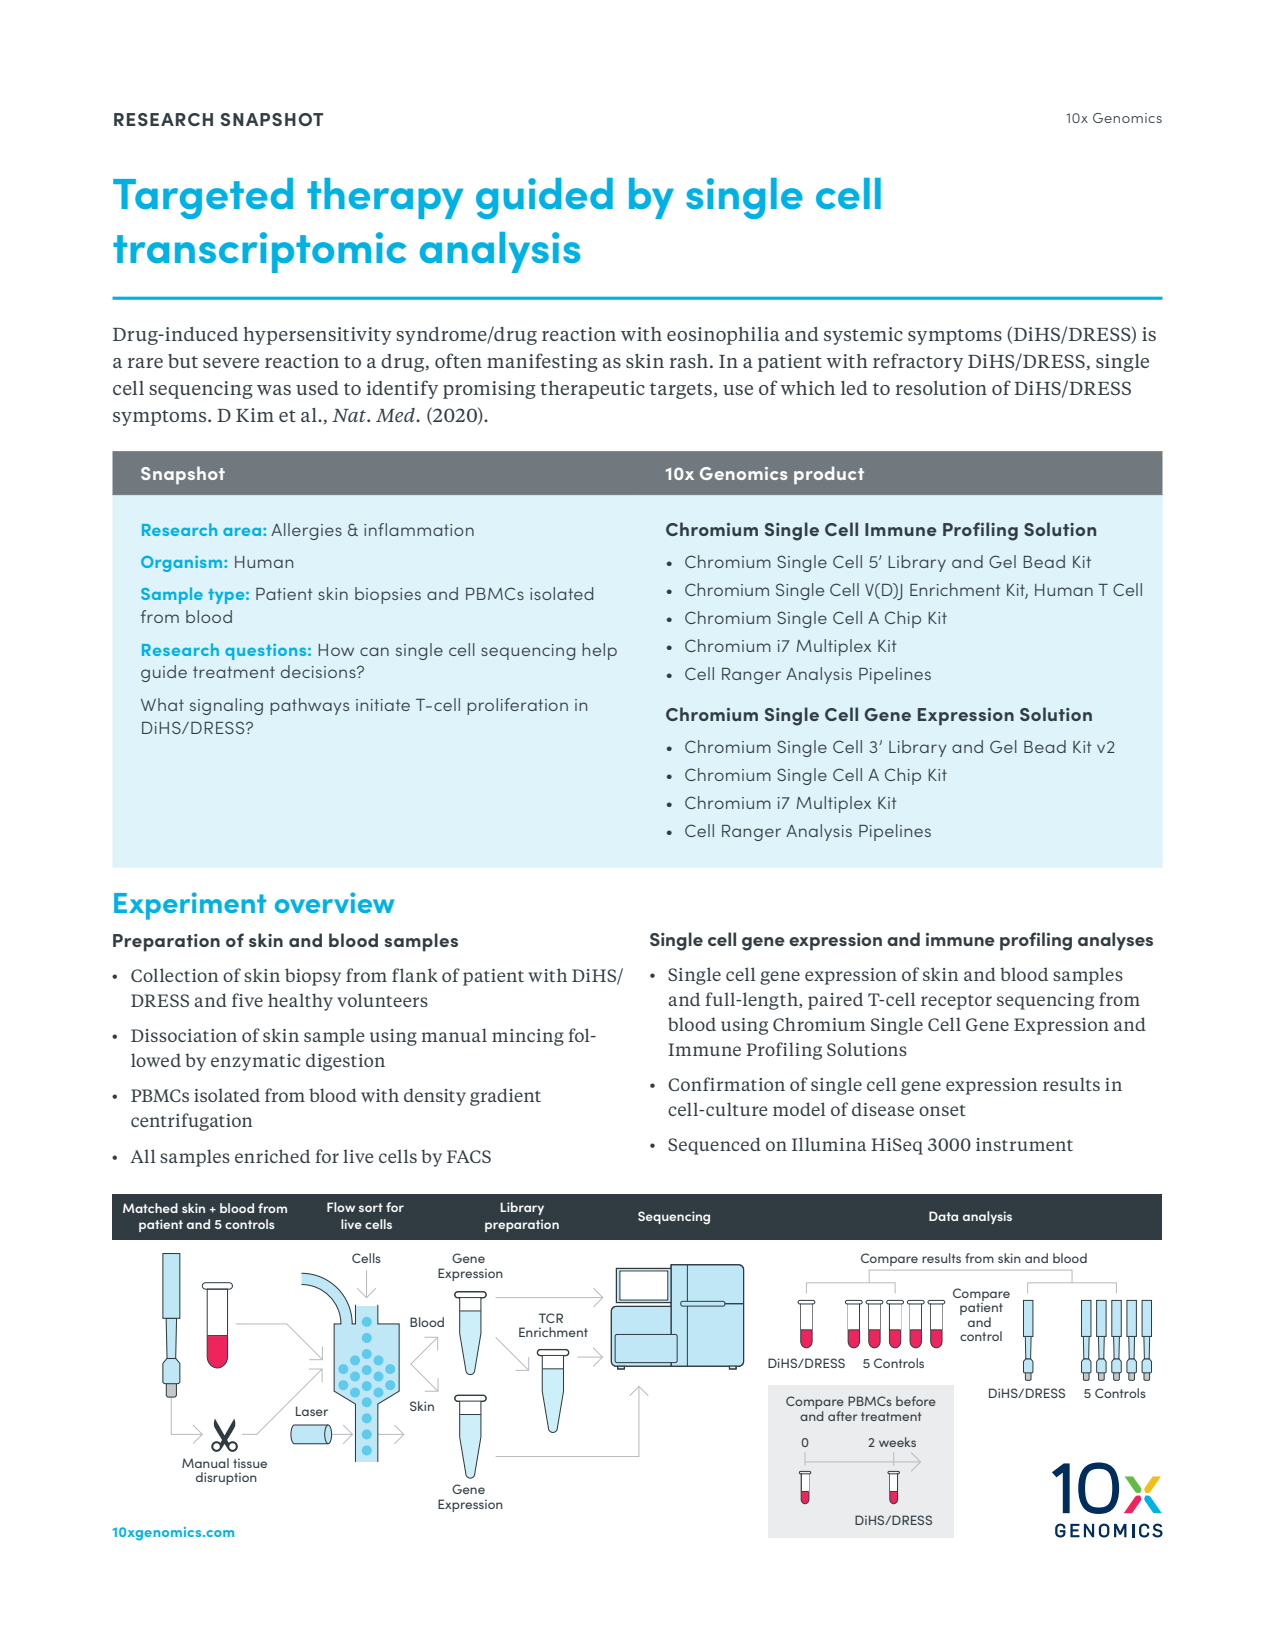 Targeted therapy guided by single cell transcriptomic analysis